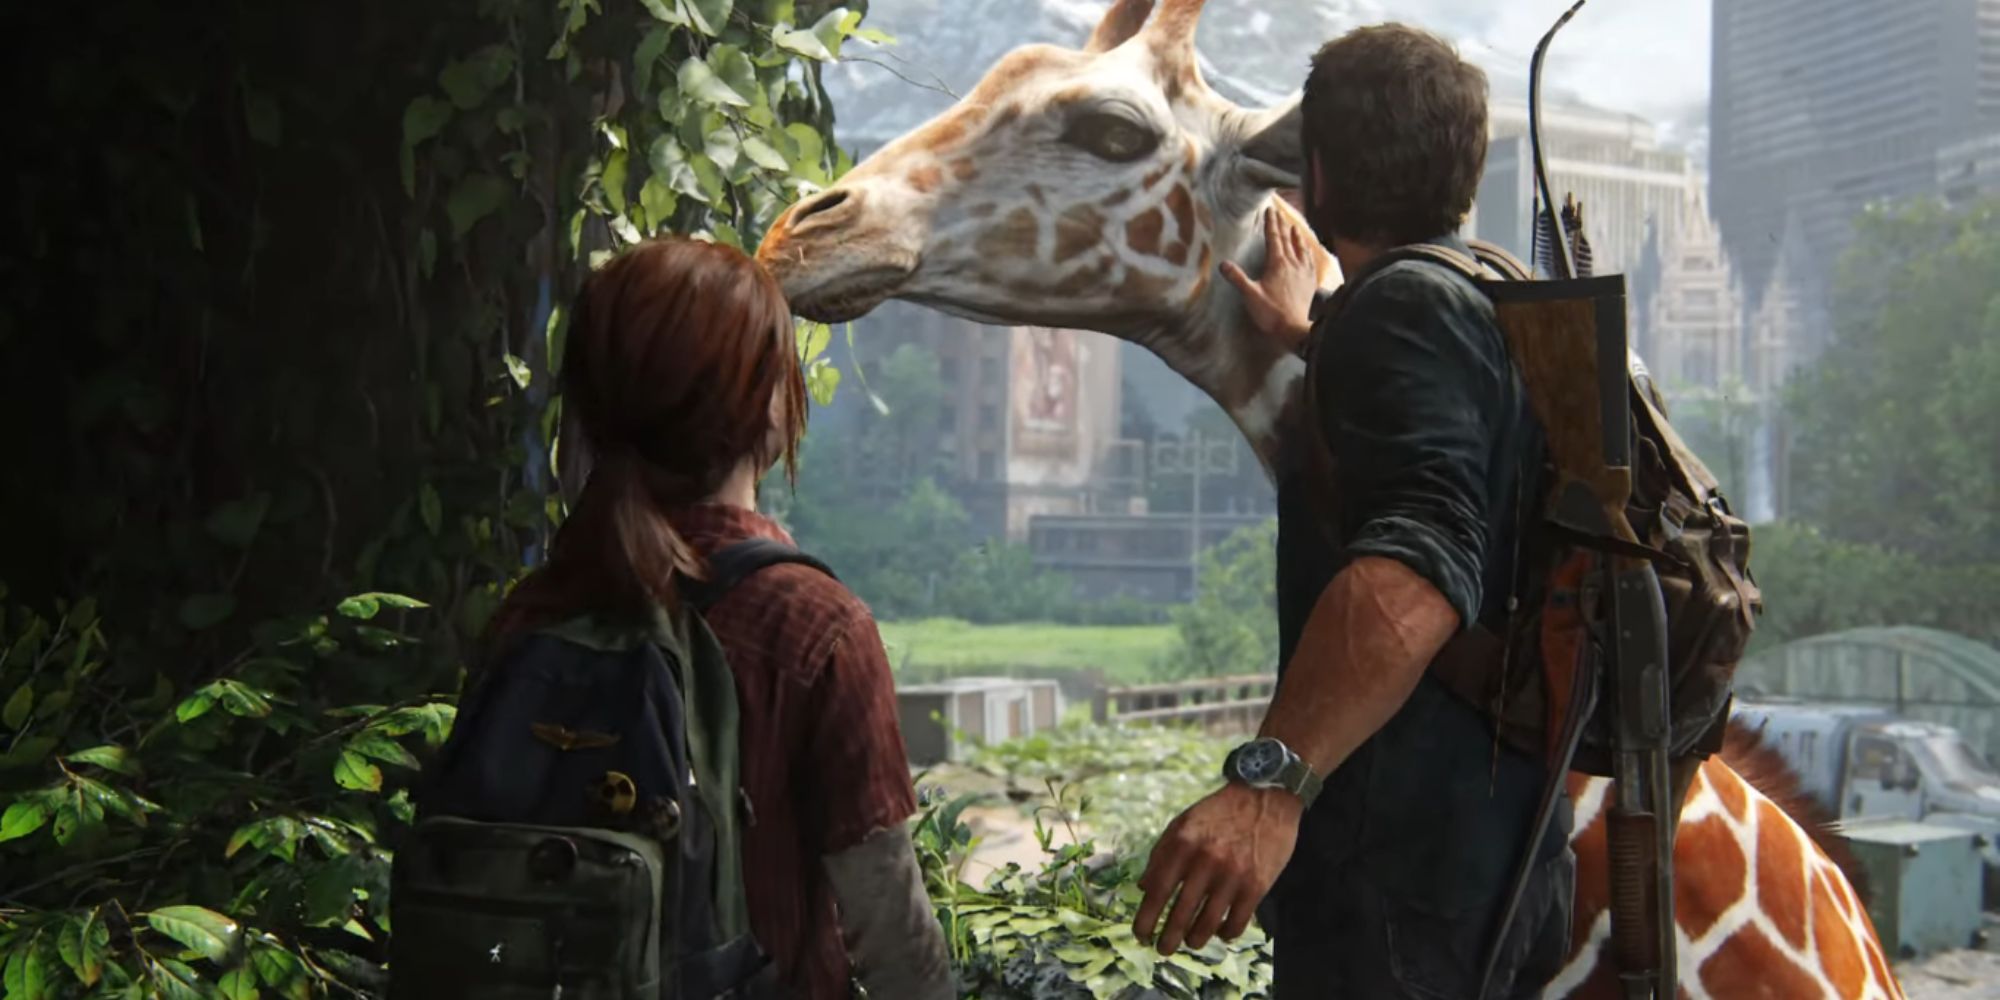 Ellie approaches Joel as he pets a giraffe on a sunny day